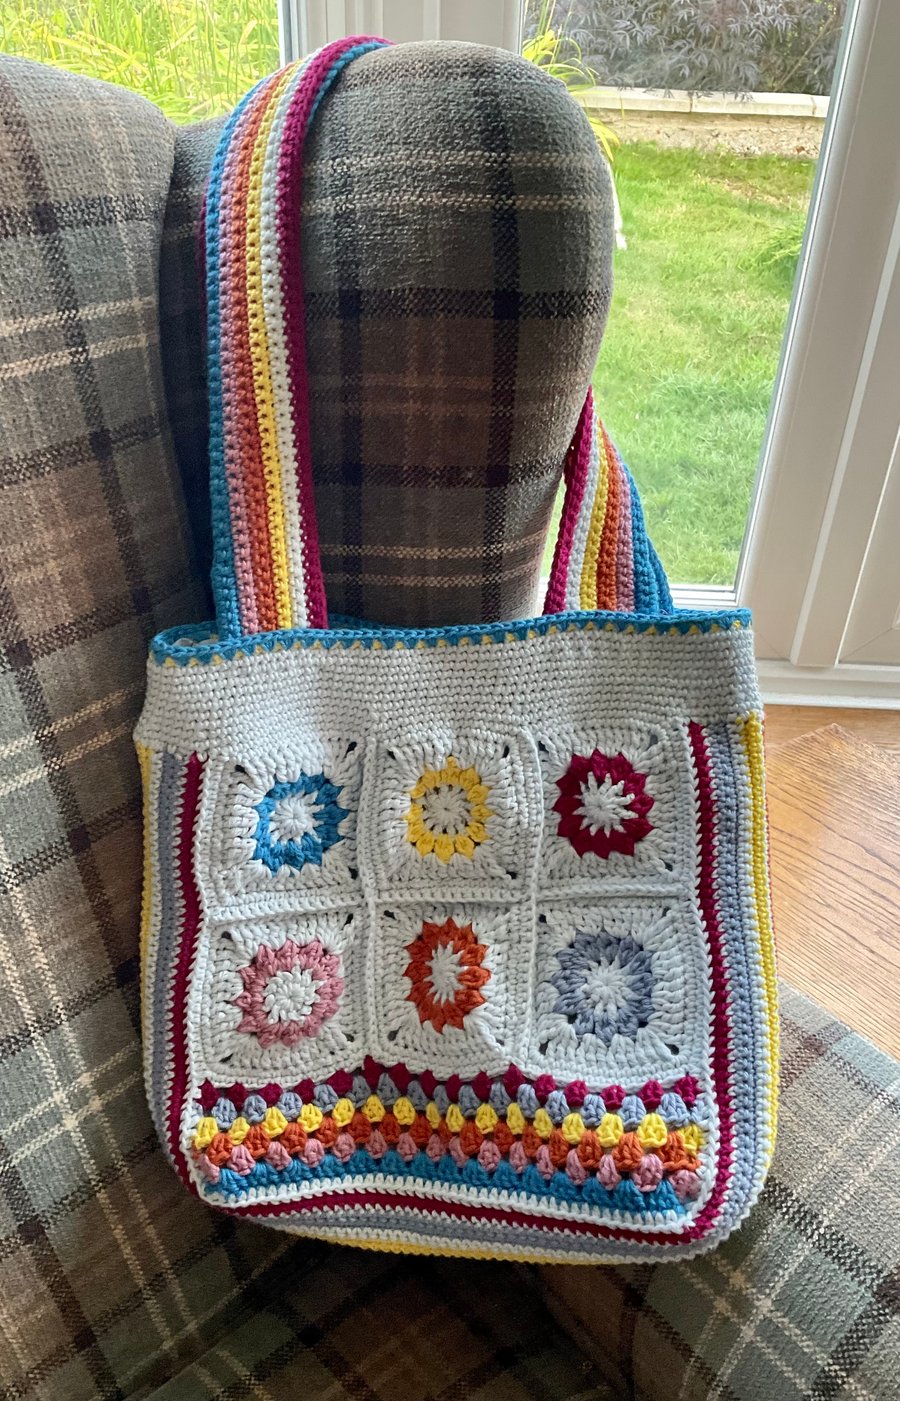 Floral Granny Squares Shoulder Tote Bag crocheted in cotton yarn.